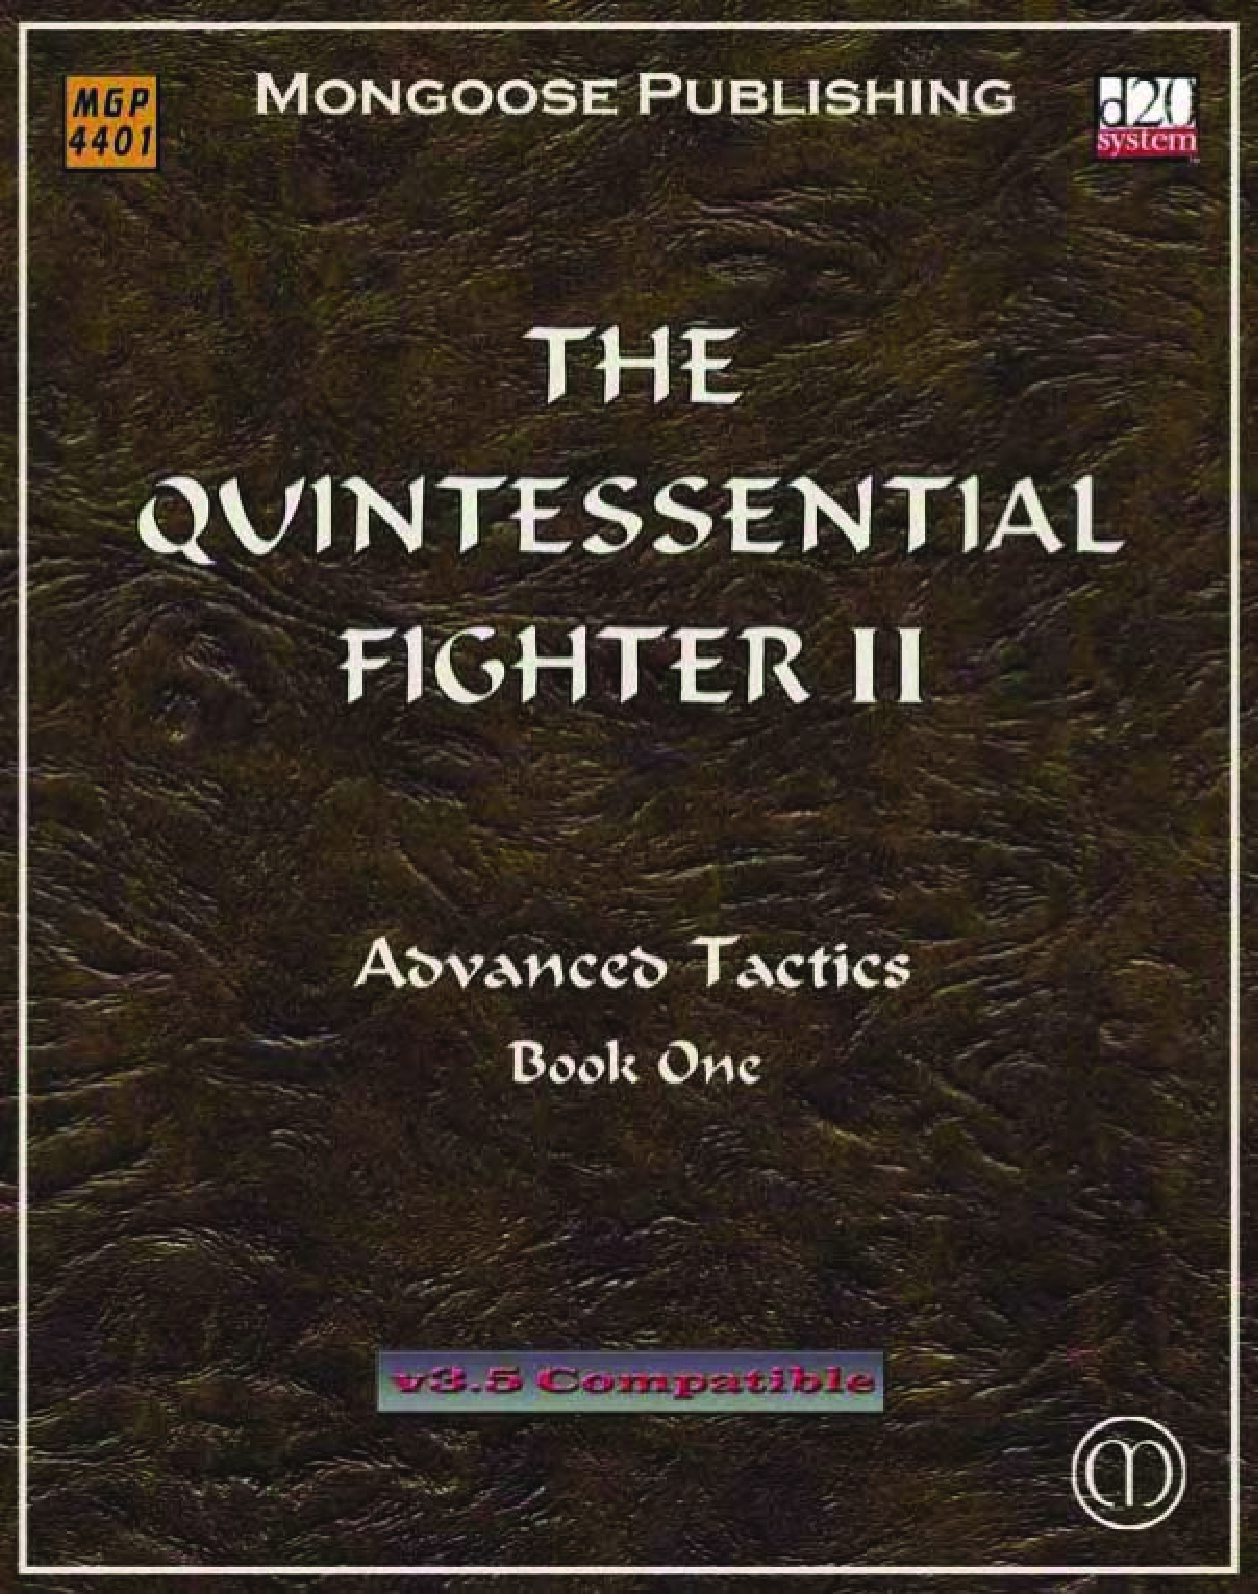 The Quintessential Fighter II